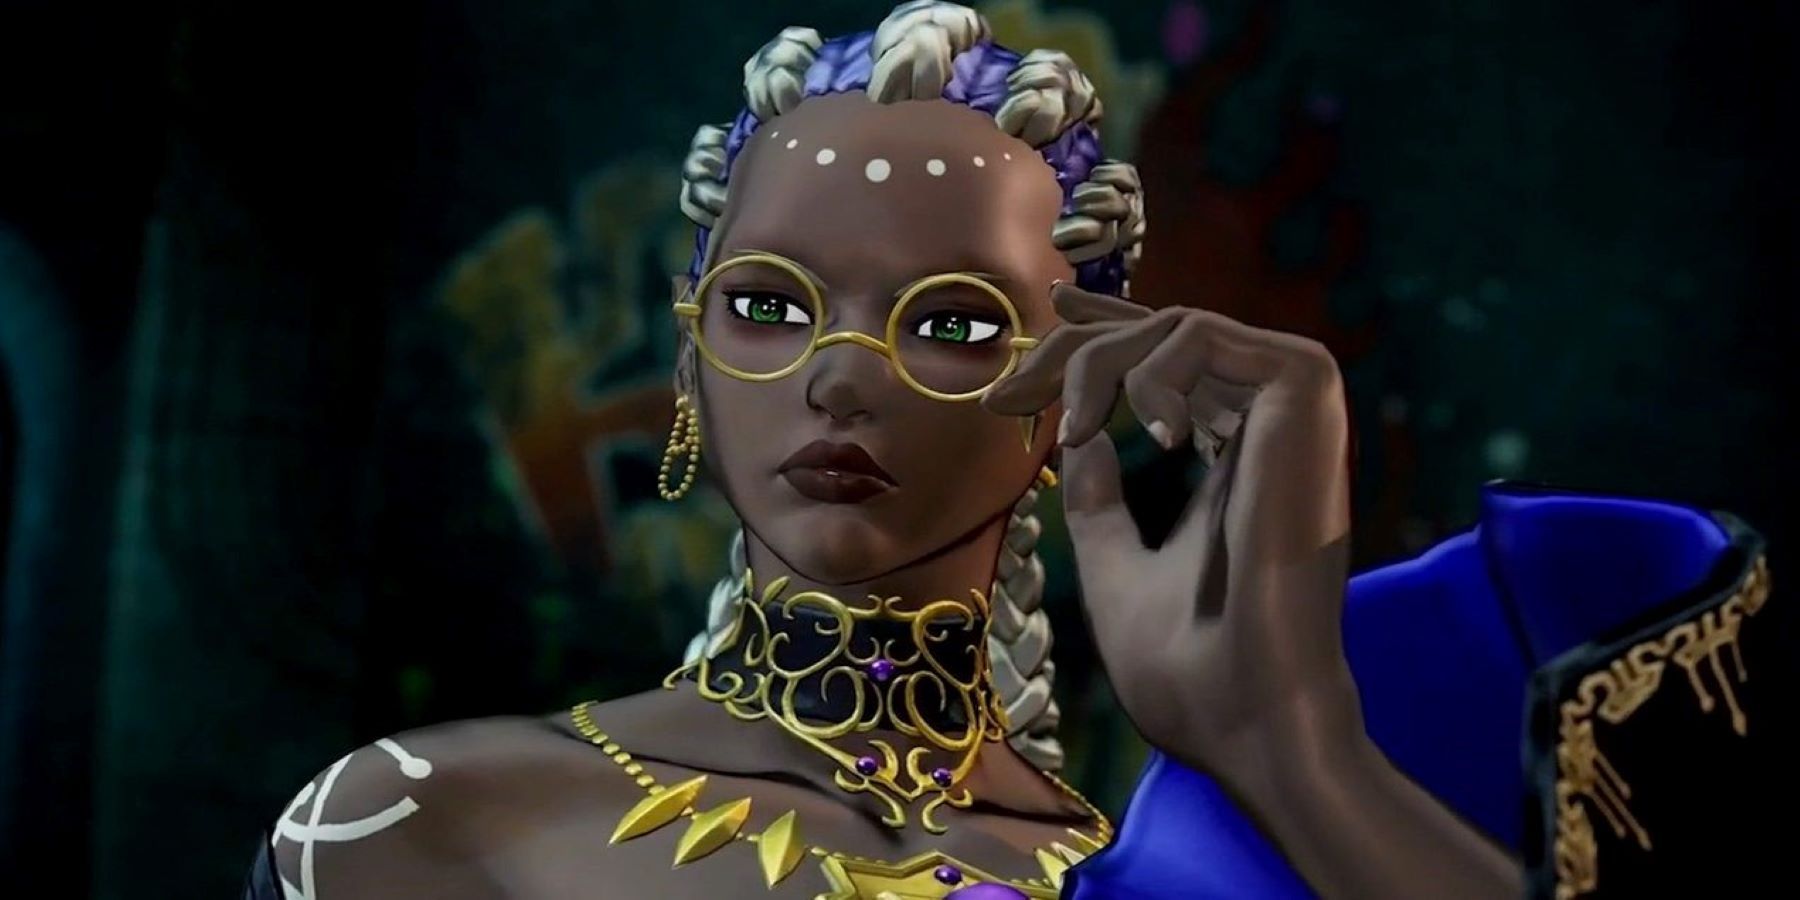 Dolores adjusting her glasses in her reveal trailer for King of Fighters 15